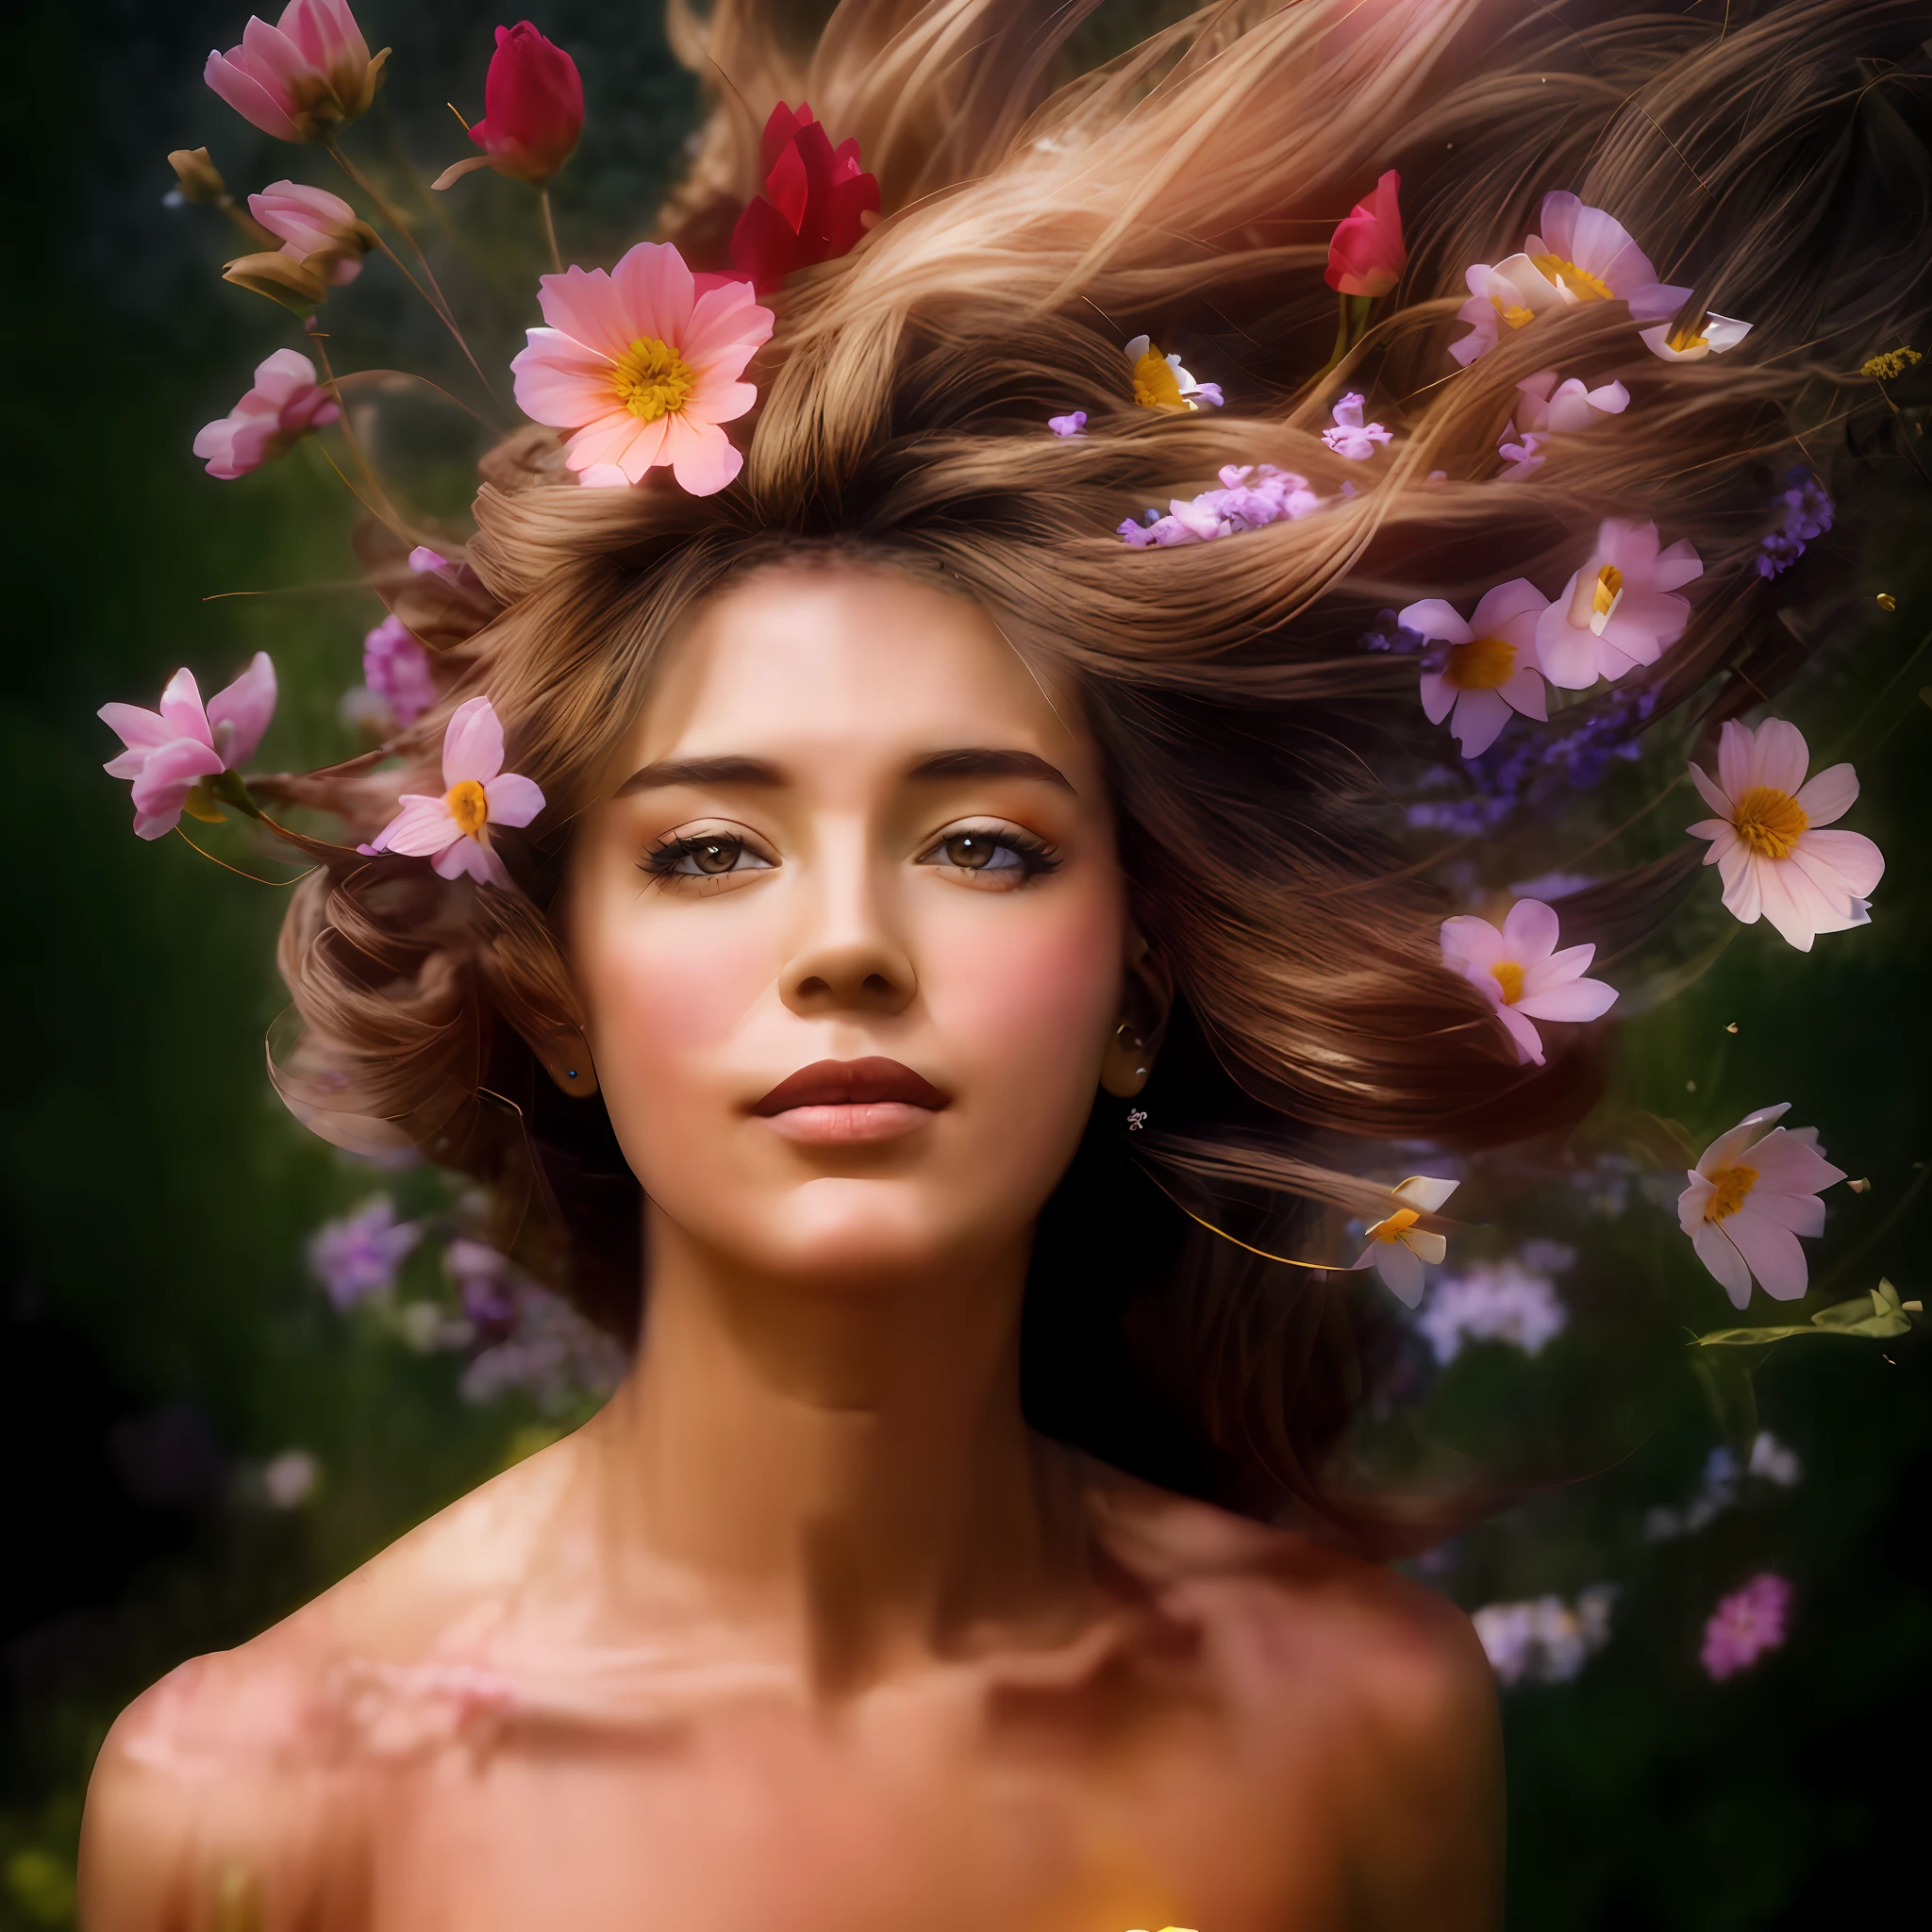 arafed woman with flowers in her hair and a wreath, floeers in hair, flower storm portrait, woman in flowers, flowers in hair, flowers in hair, age 36 years, flower goddess, cute portrait photo, brazilian woman features made of petals, female portrait with flowers, frontal brazilian woman in a field of flowers,  Looking forward, light makeup, realism, realistic photos, professional color correction, 8K, F2.4 aperture, 35mm lens, realistic real face, only the face area is included, with ordinary clothing, brown skin, wavy hair, alone in the image, with passionate look, with happy feeling, background with landscape.